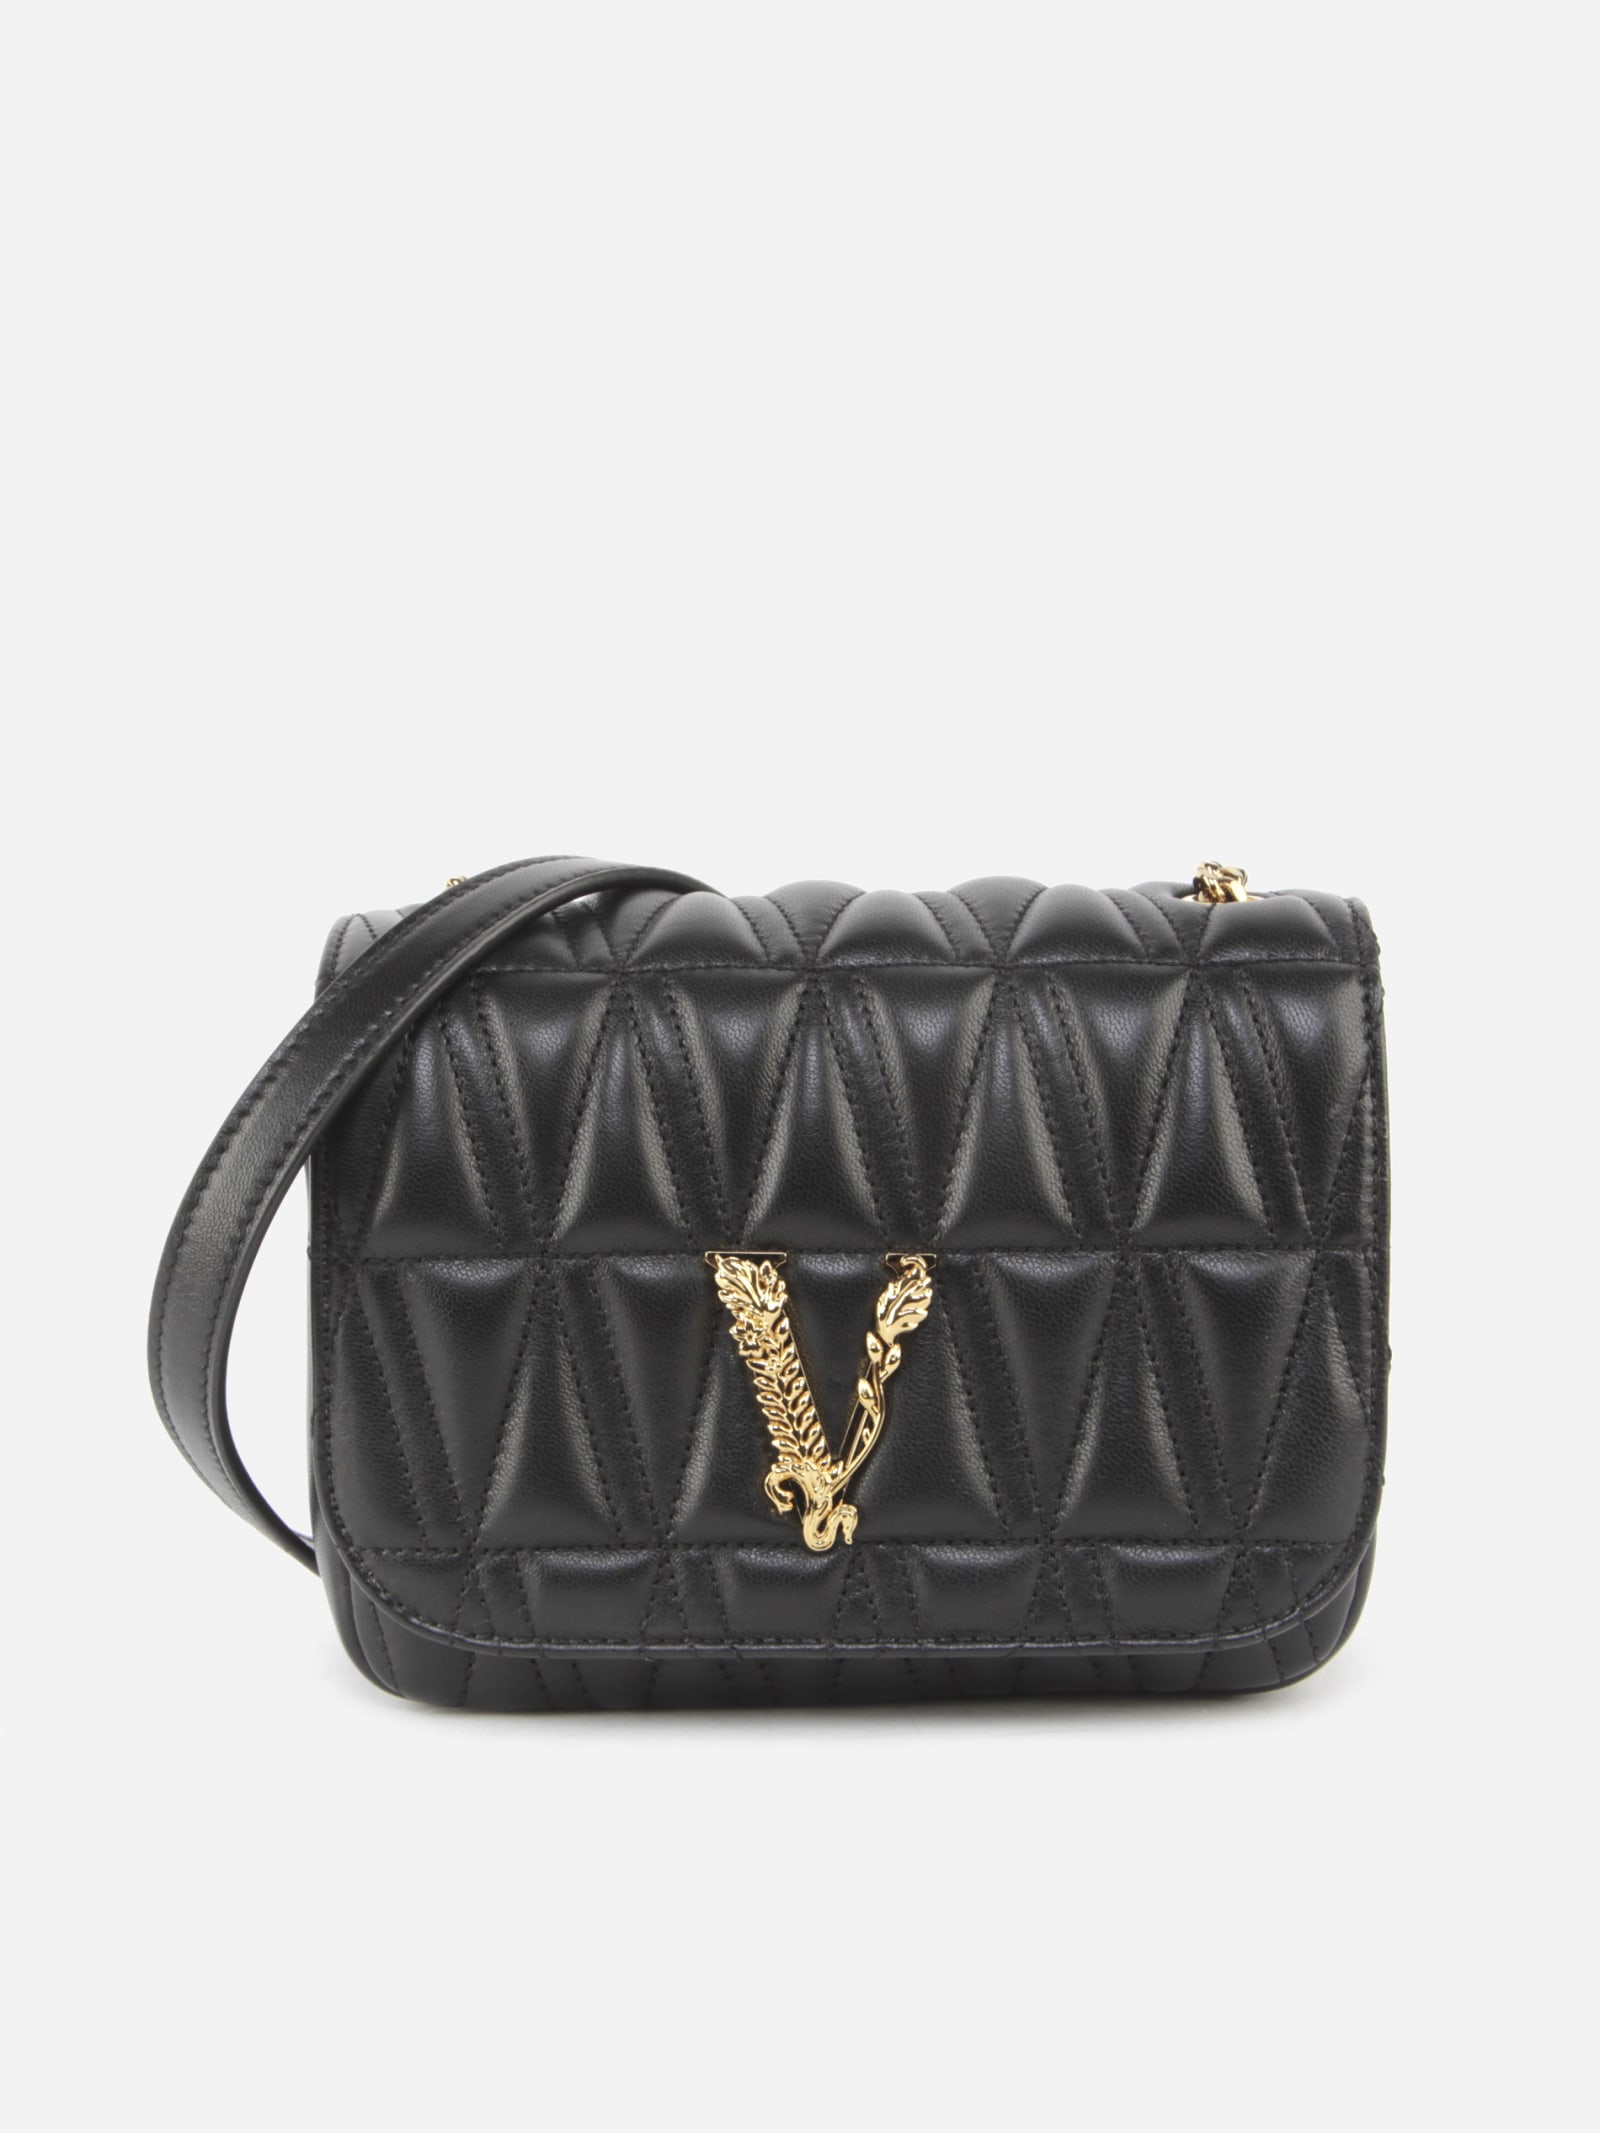 VERSACE VERSACE VIRTUS BAG IN QUILTED LEATHER,DBFH821 D2NTRTDNMOV